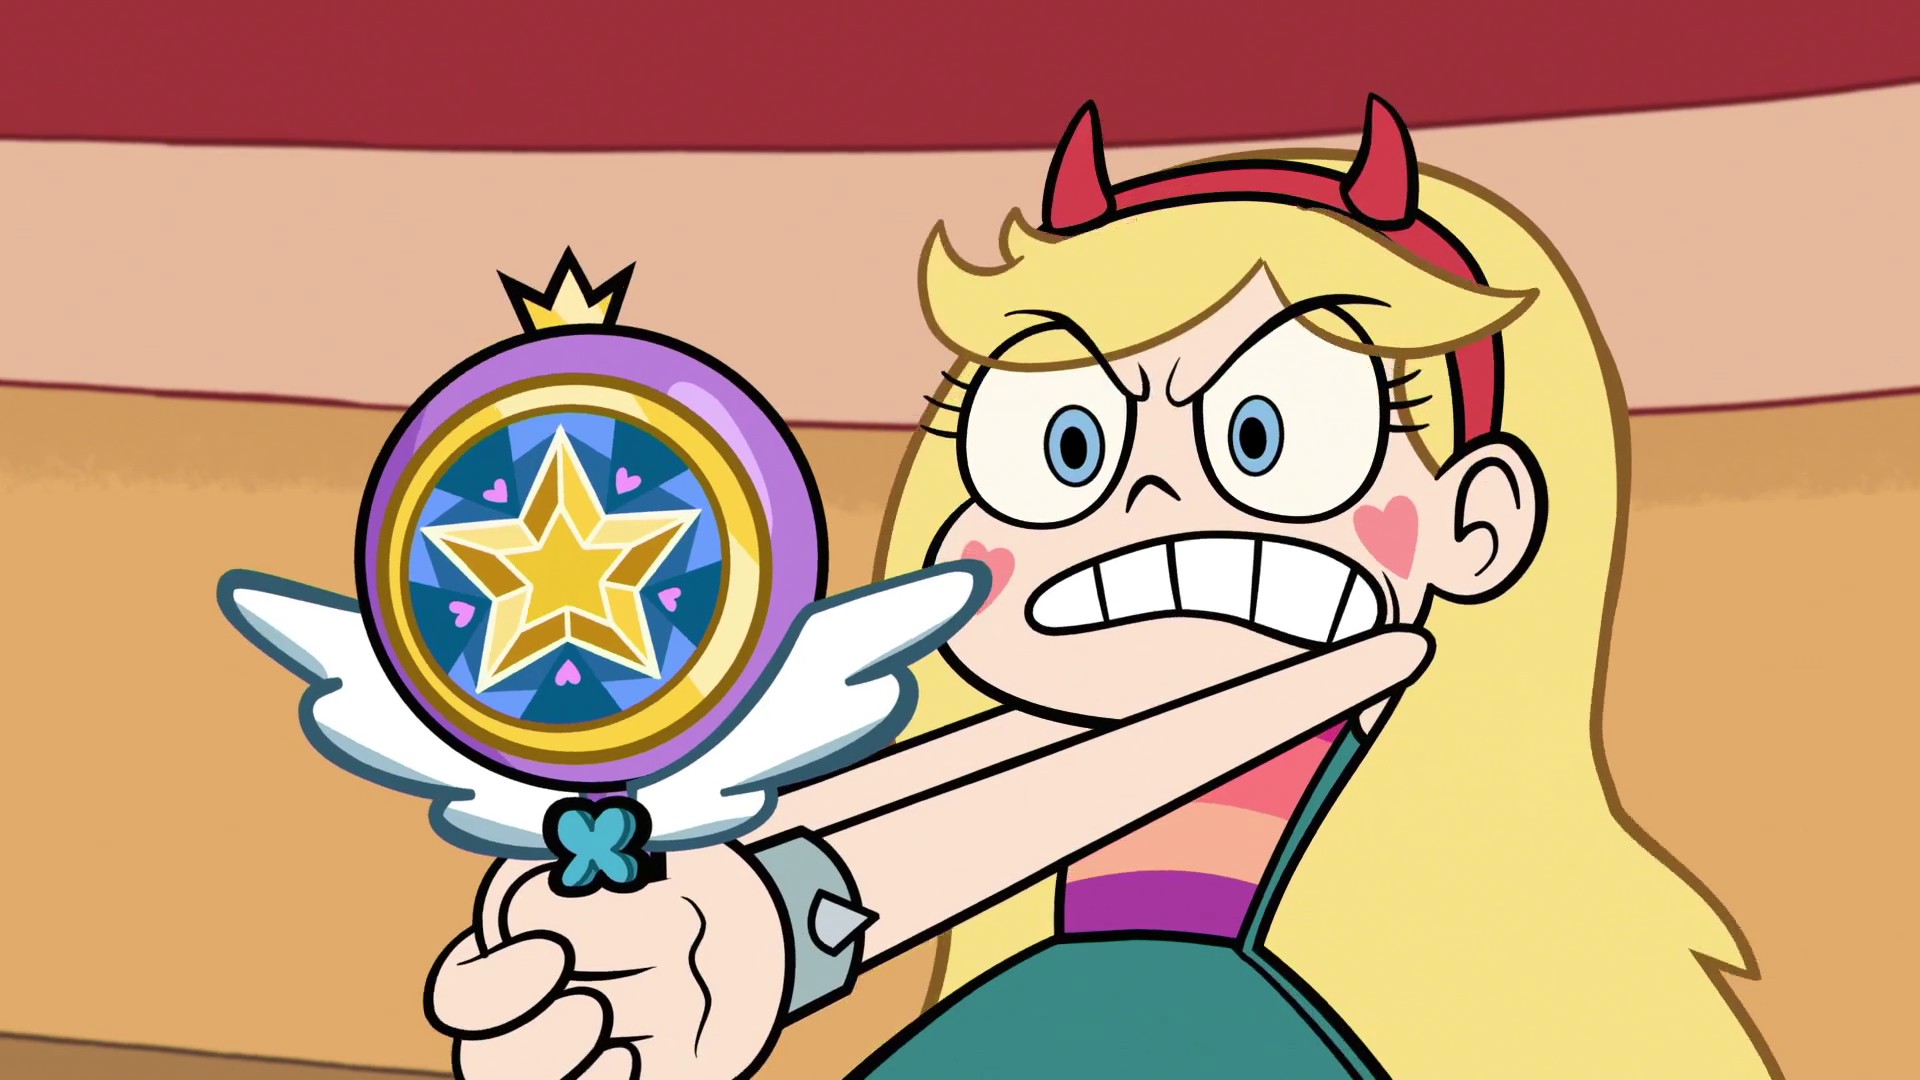 Star vs the Forces of Evil wallpaper.